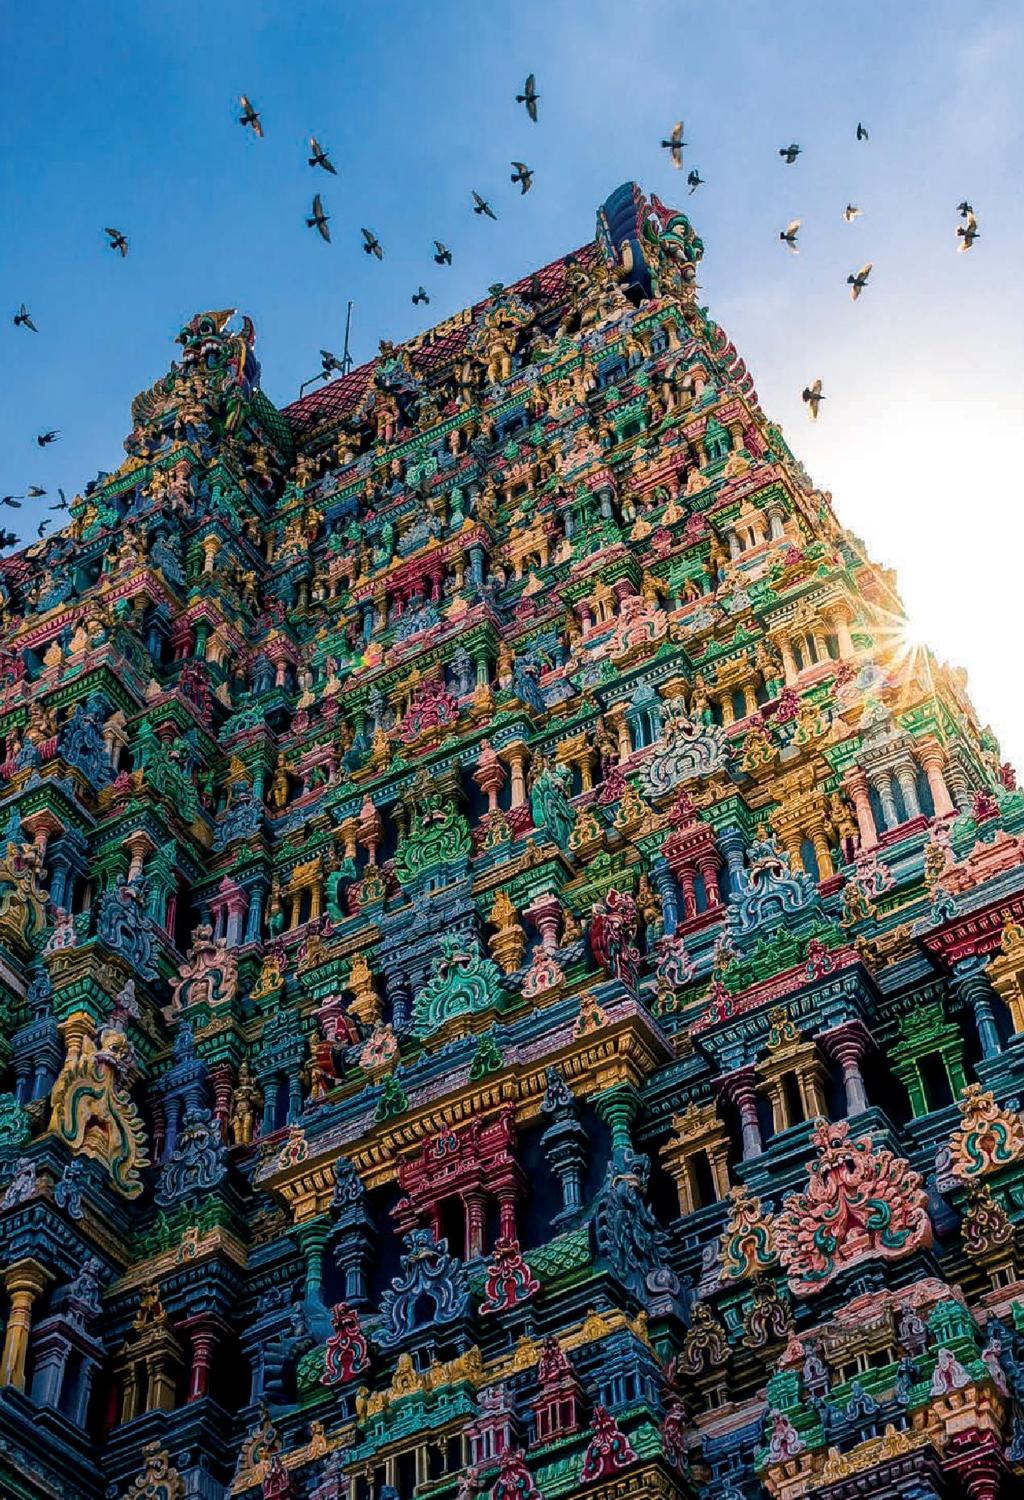 A journey across colourful landscapes, the trip includes a little bit of everything, from intricately carved temple complexes to lush jungle backwaters and historic harbour ports.